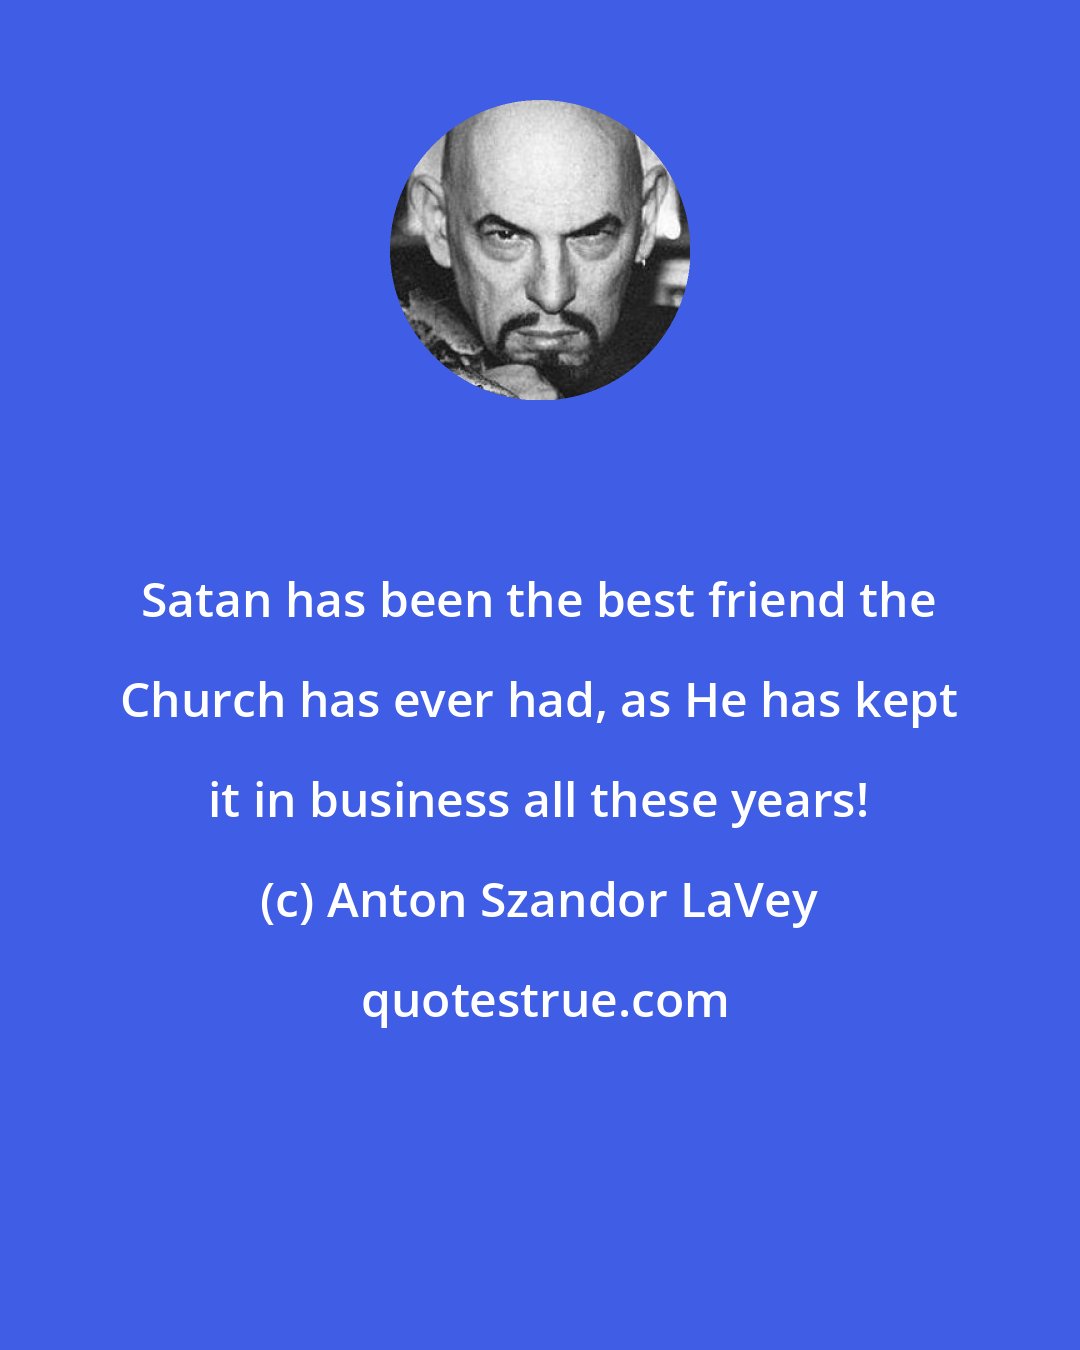 Anton Szandor LaVey: Satan has been the best friend the Church has ever had, as He has kept it in business all these years!